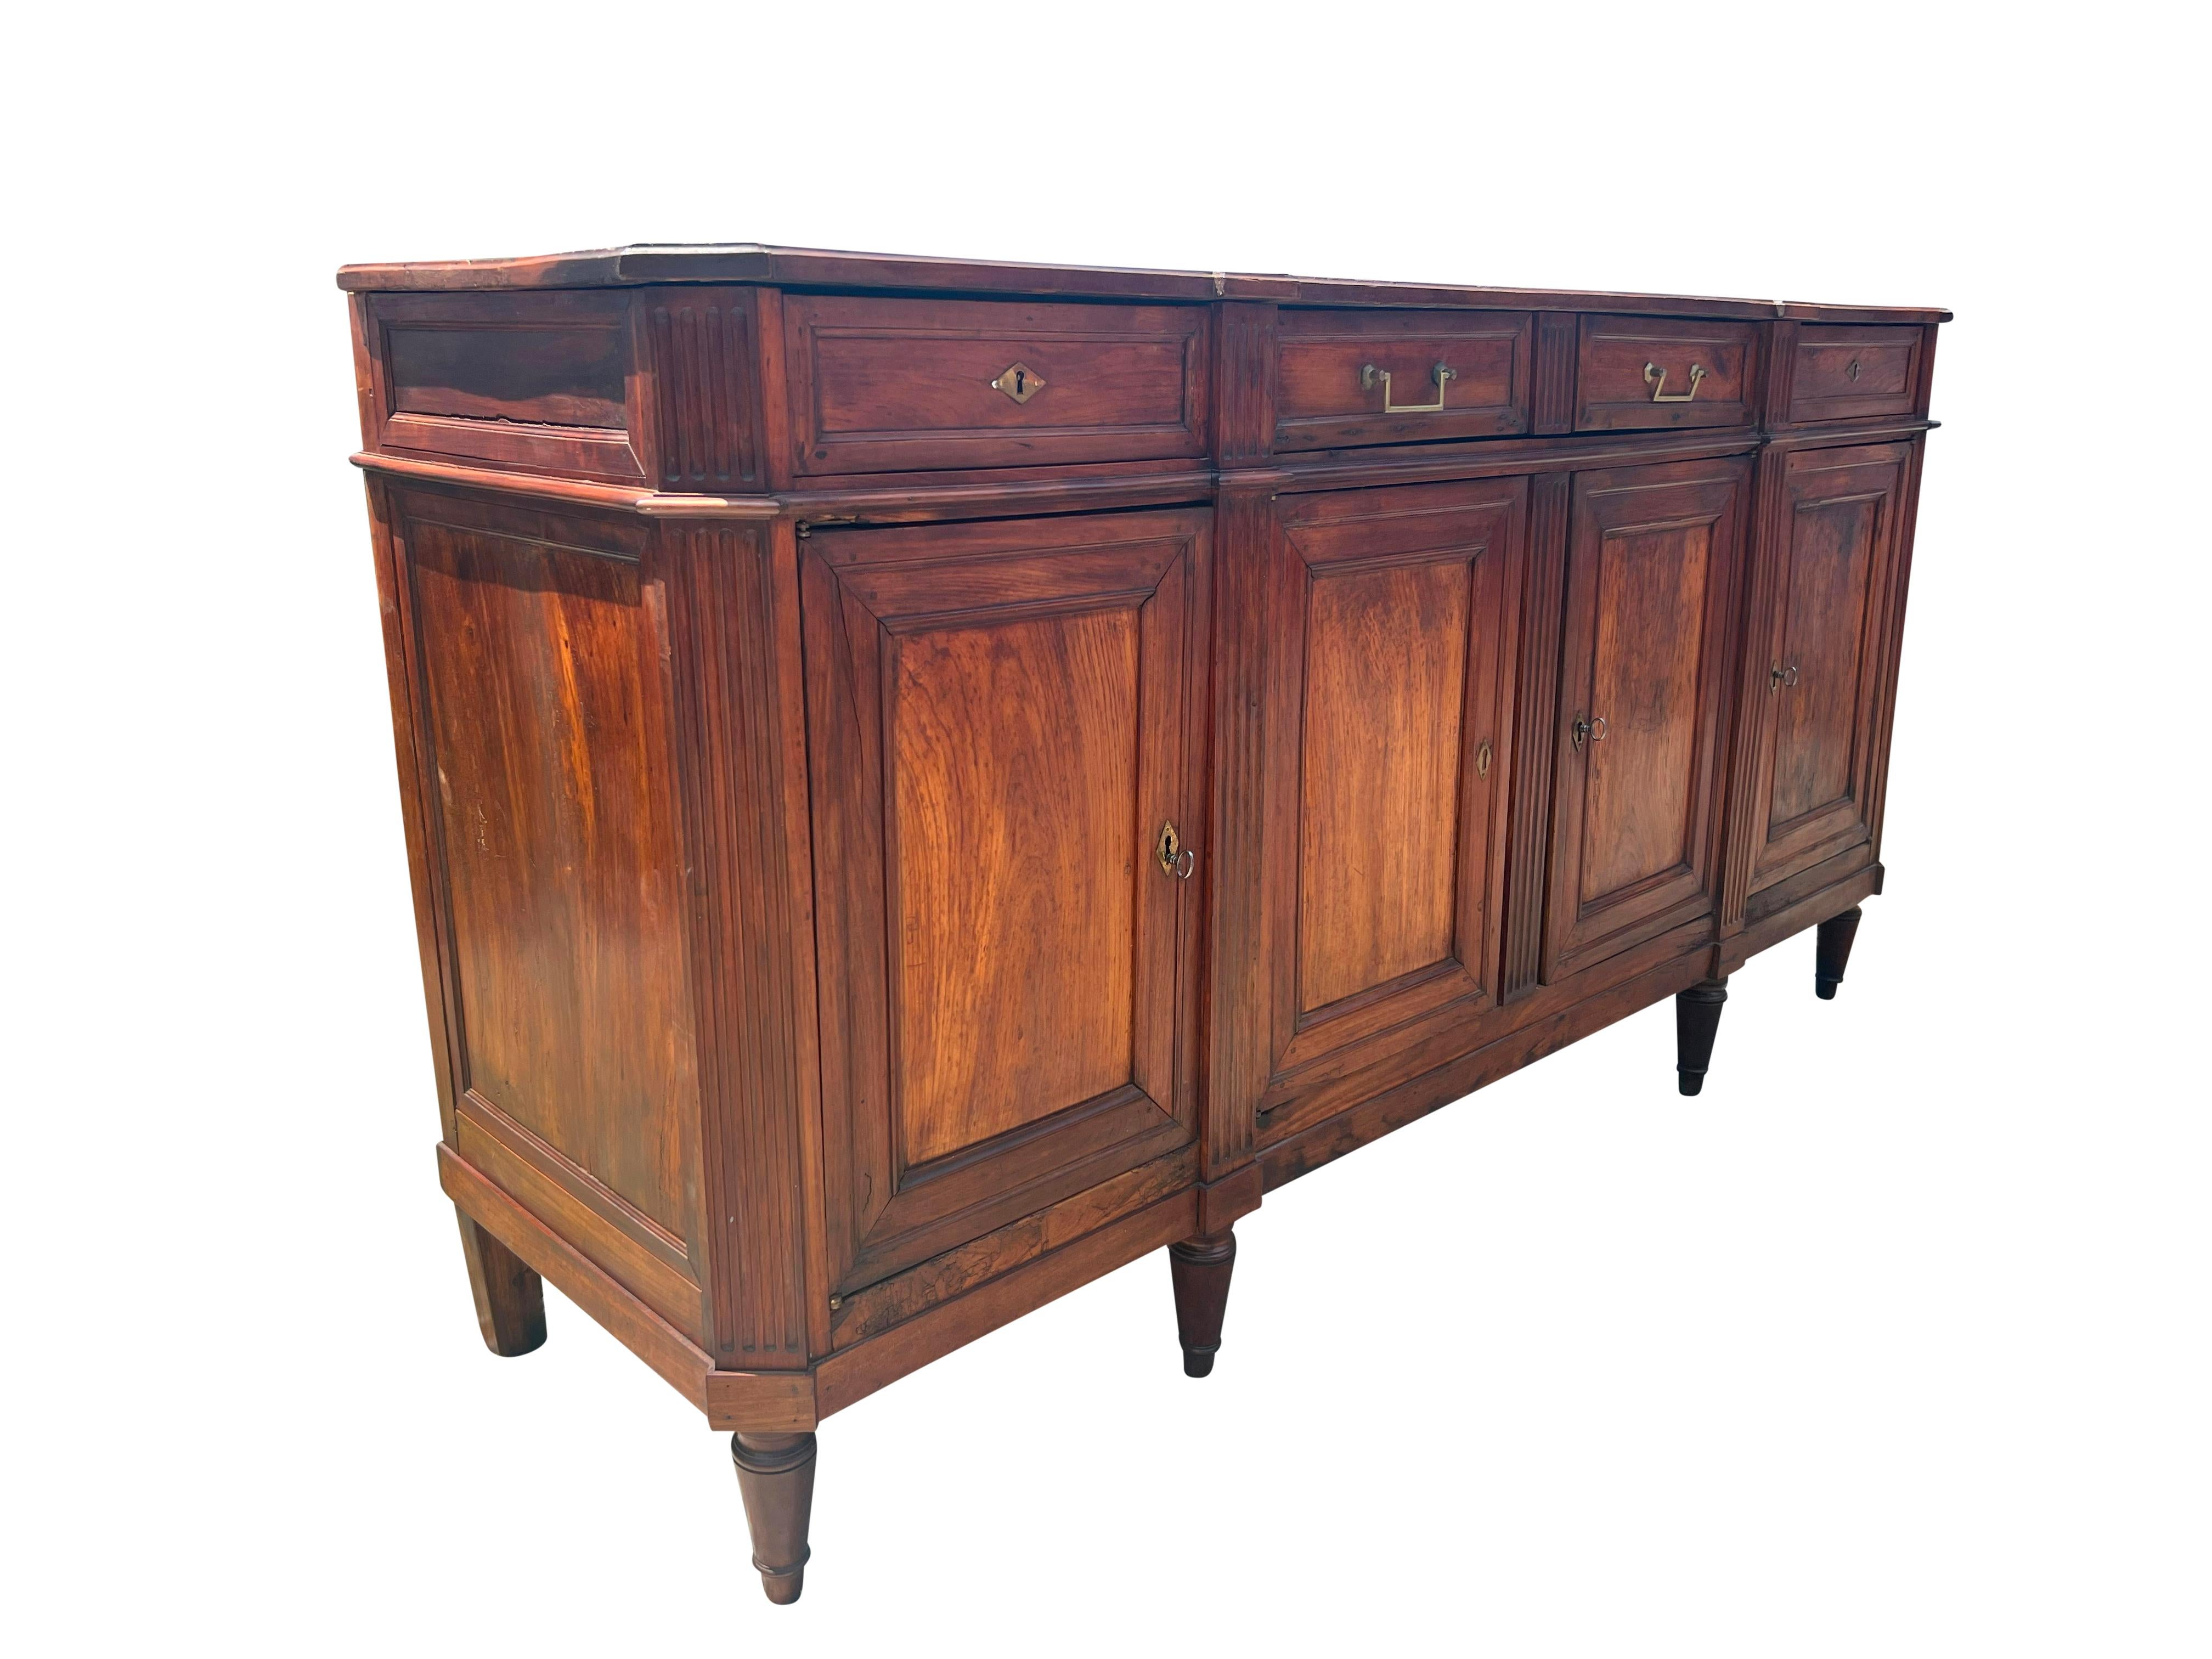 Rectangular top over a long center drawer flanked by a pair of drawers over a pair of cabinet doors flanked by doors. Fluted canted corners. Raised on circular tapered legs. From a Hamilton Mass estate. Key.